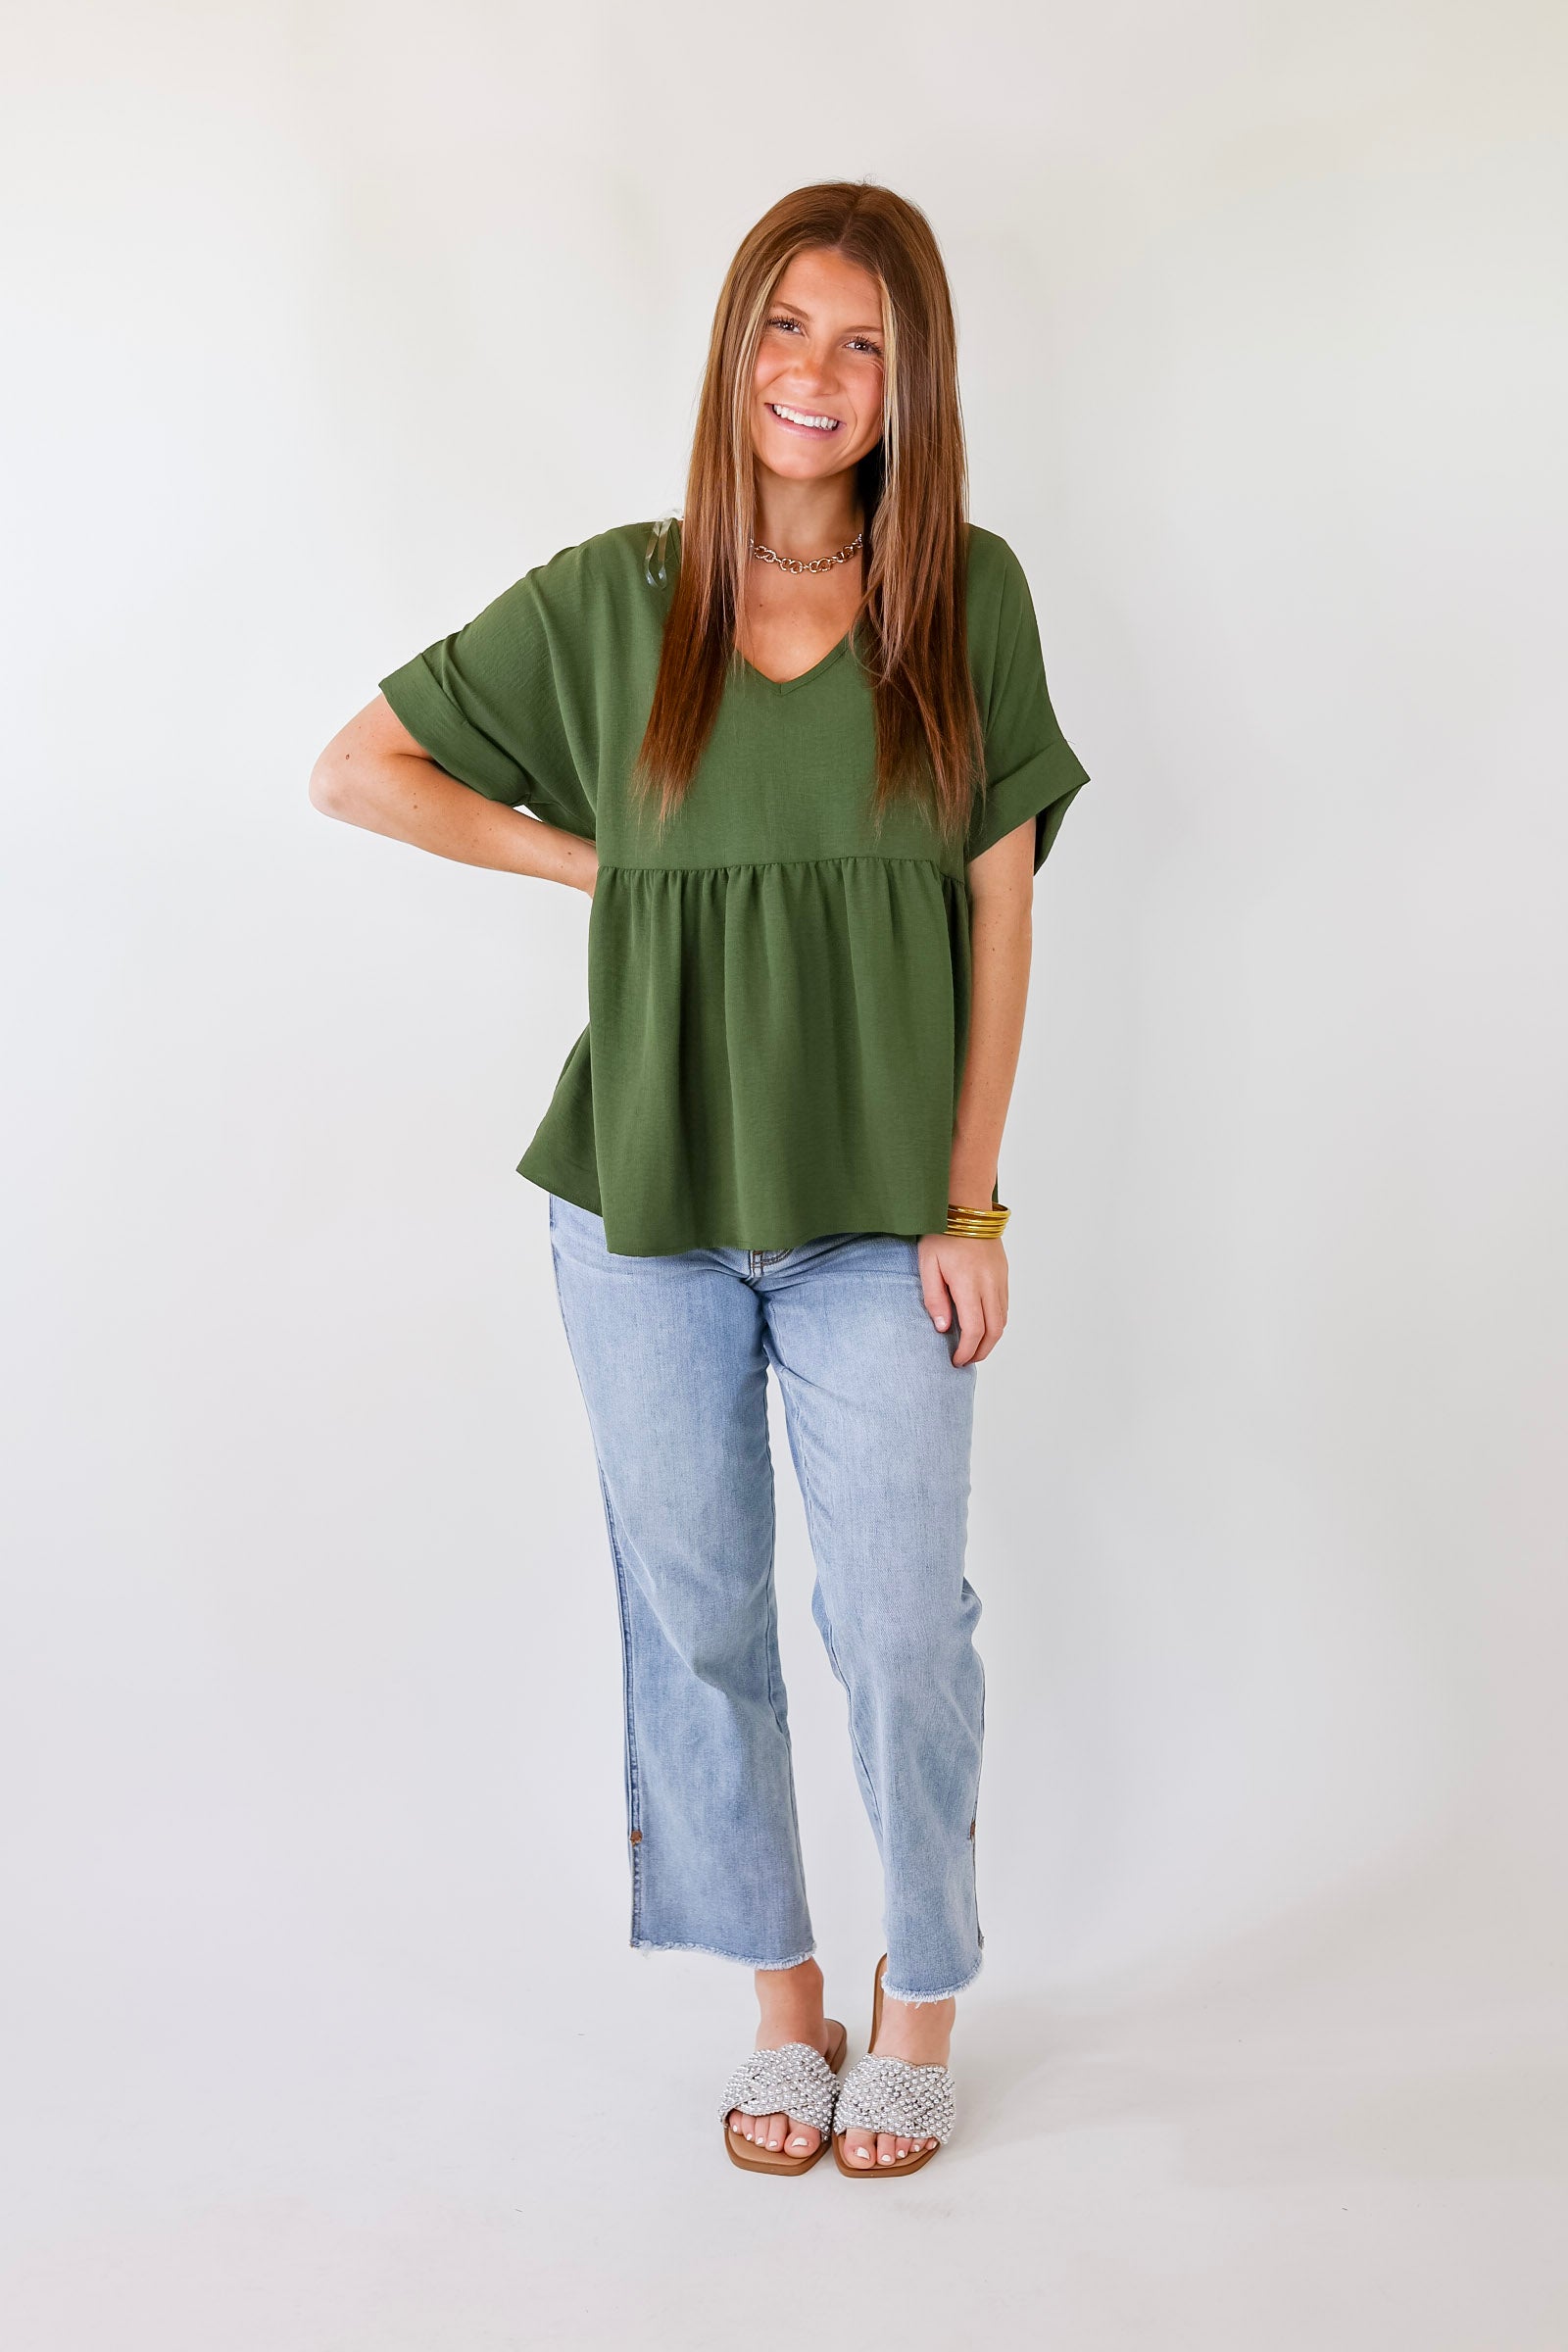 Touring the City Short Sleeve V Neck Babydoll Top in Olive Green